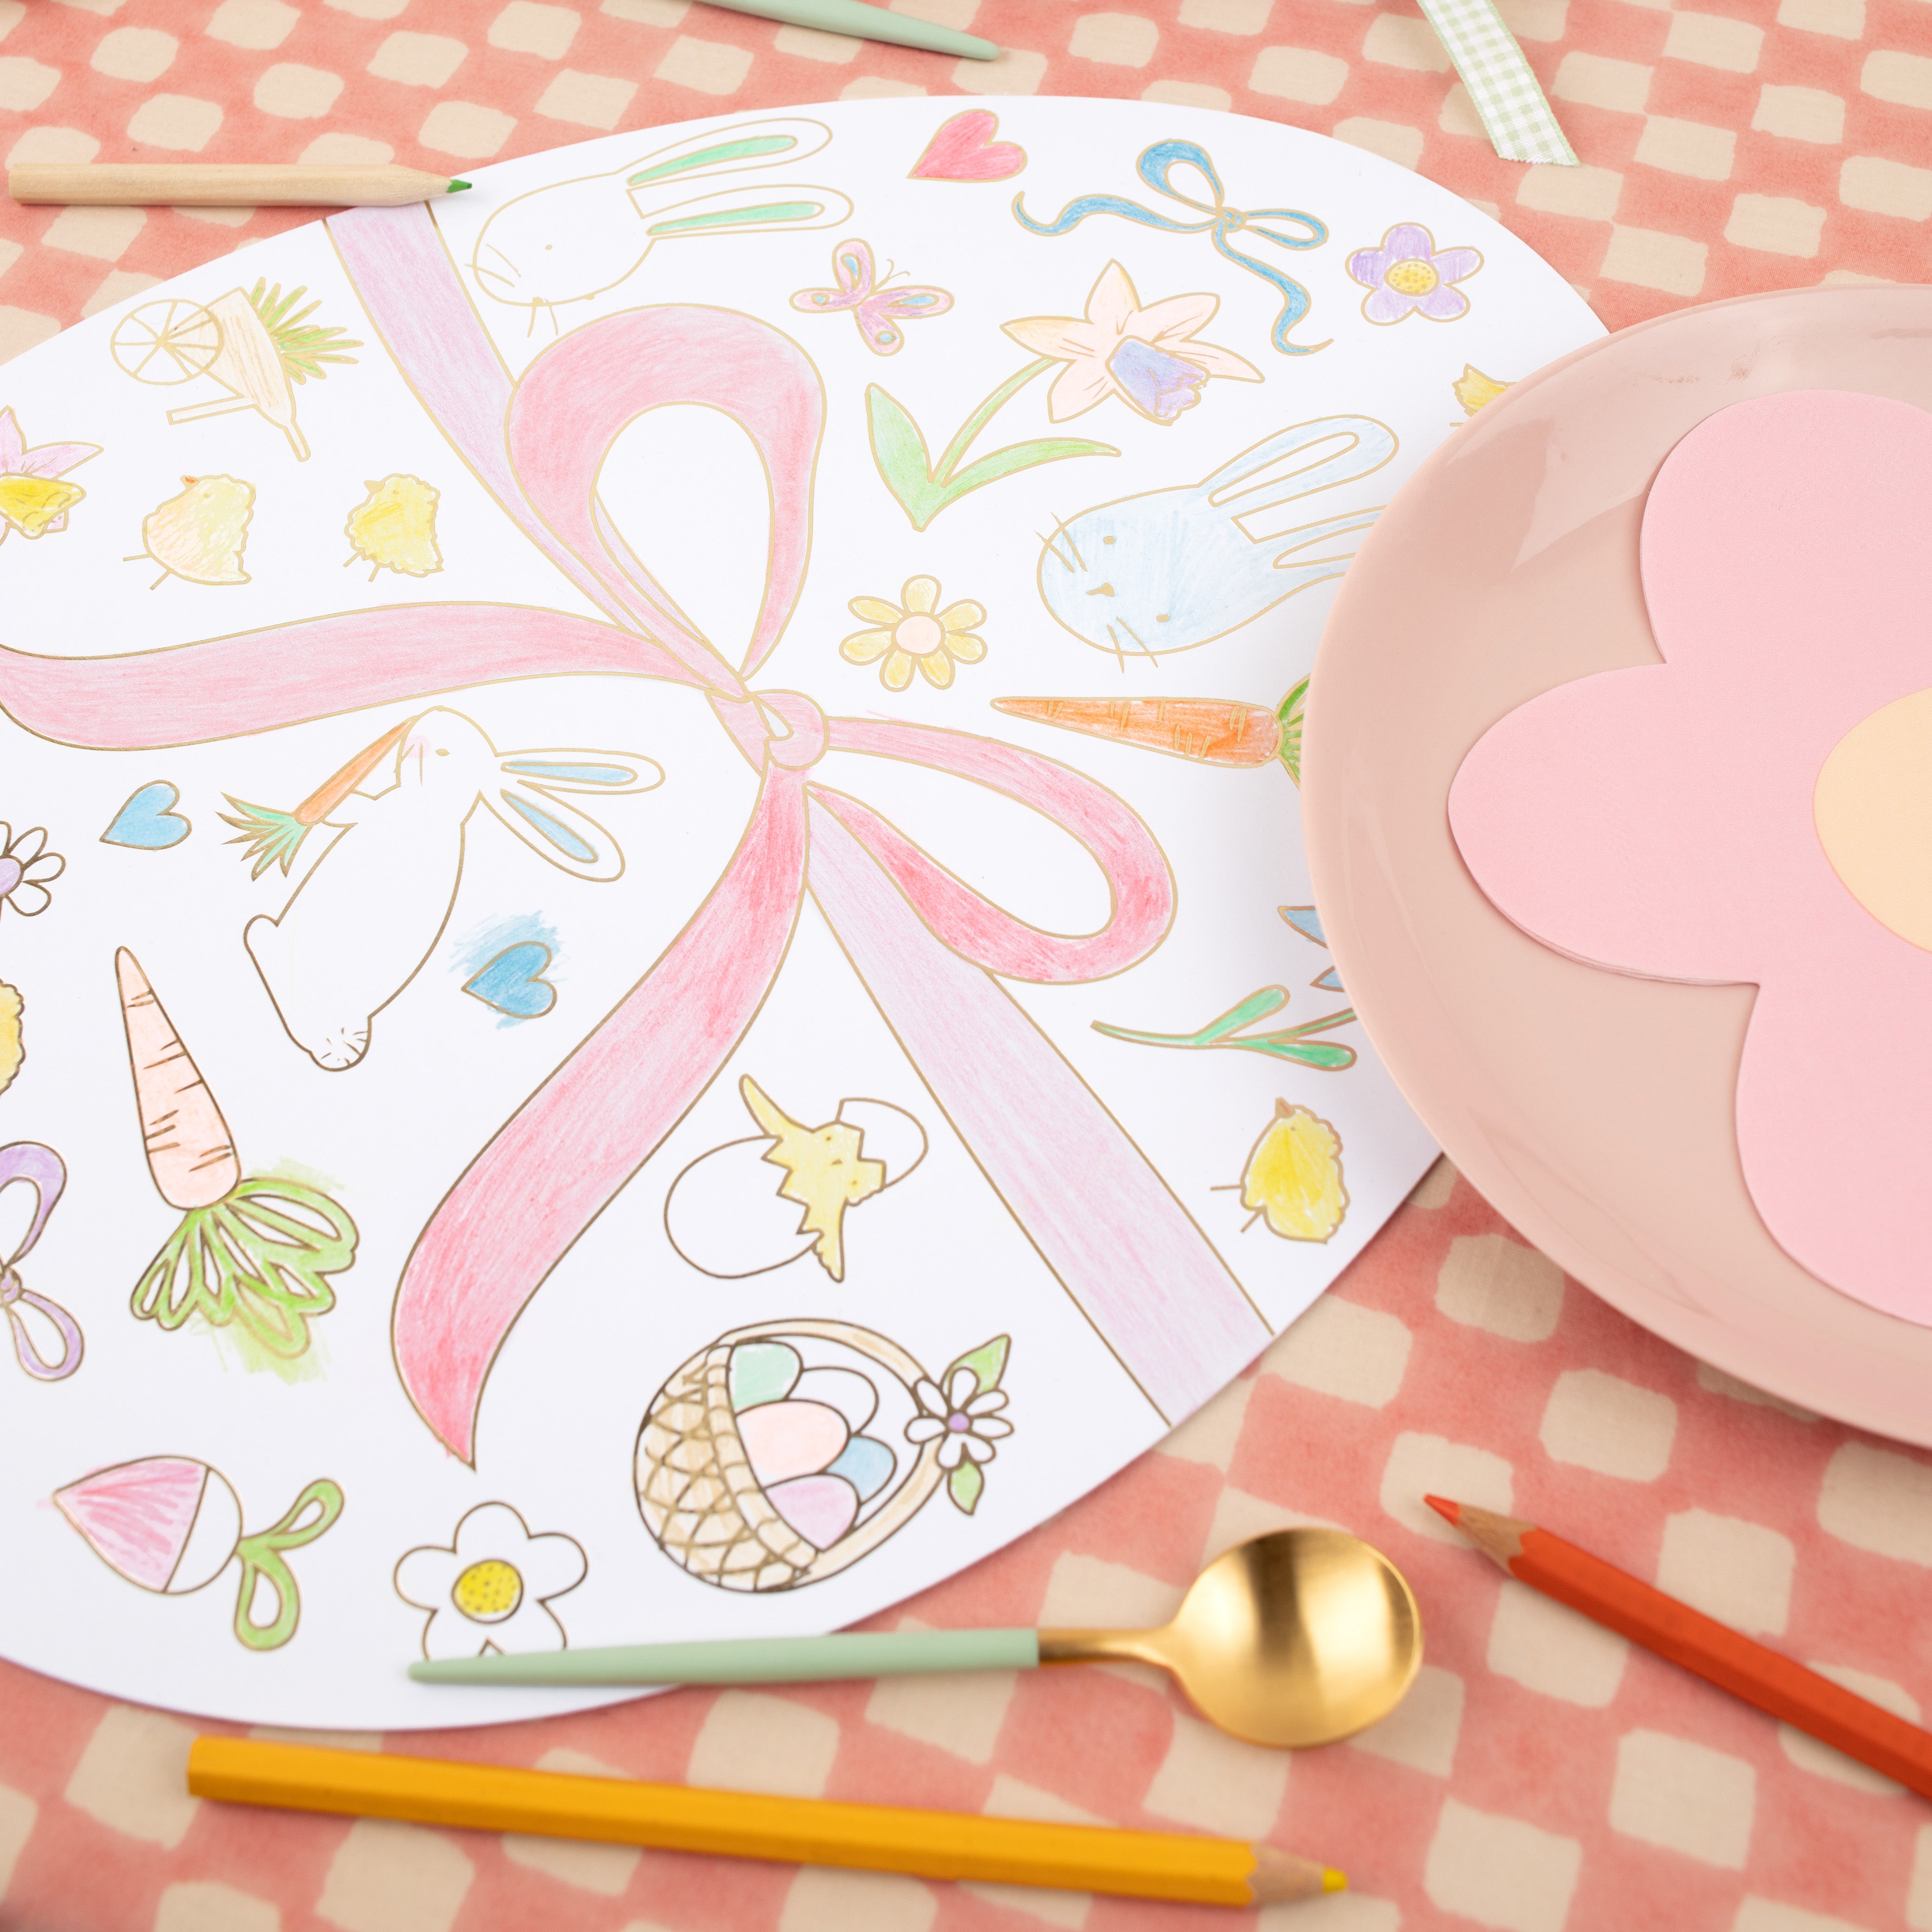 If you're looking for coloring fun for Easter, you'll love our kids placemats.